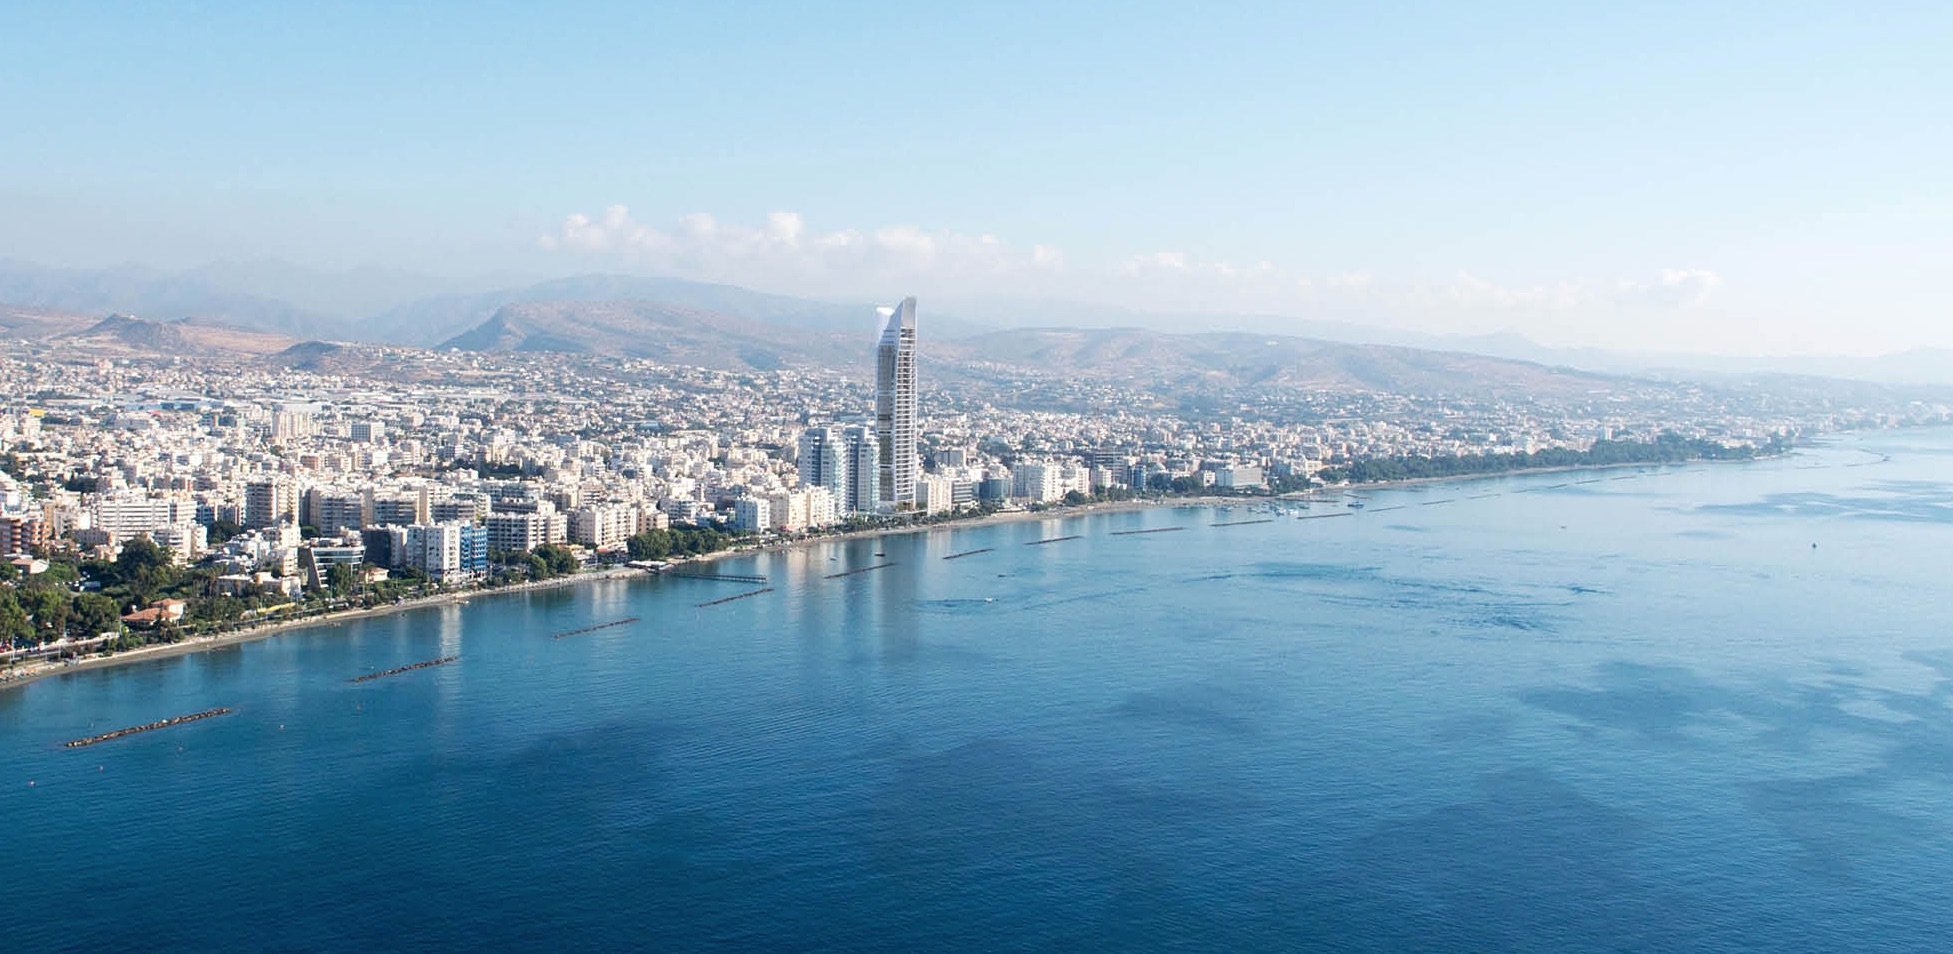 The highest residential complex in Europe will be built on Cyprus